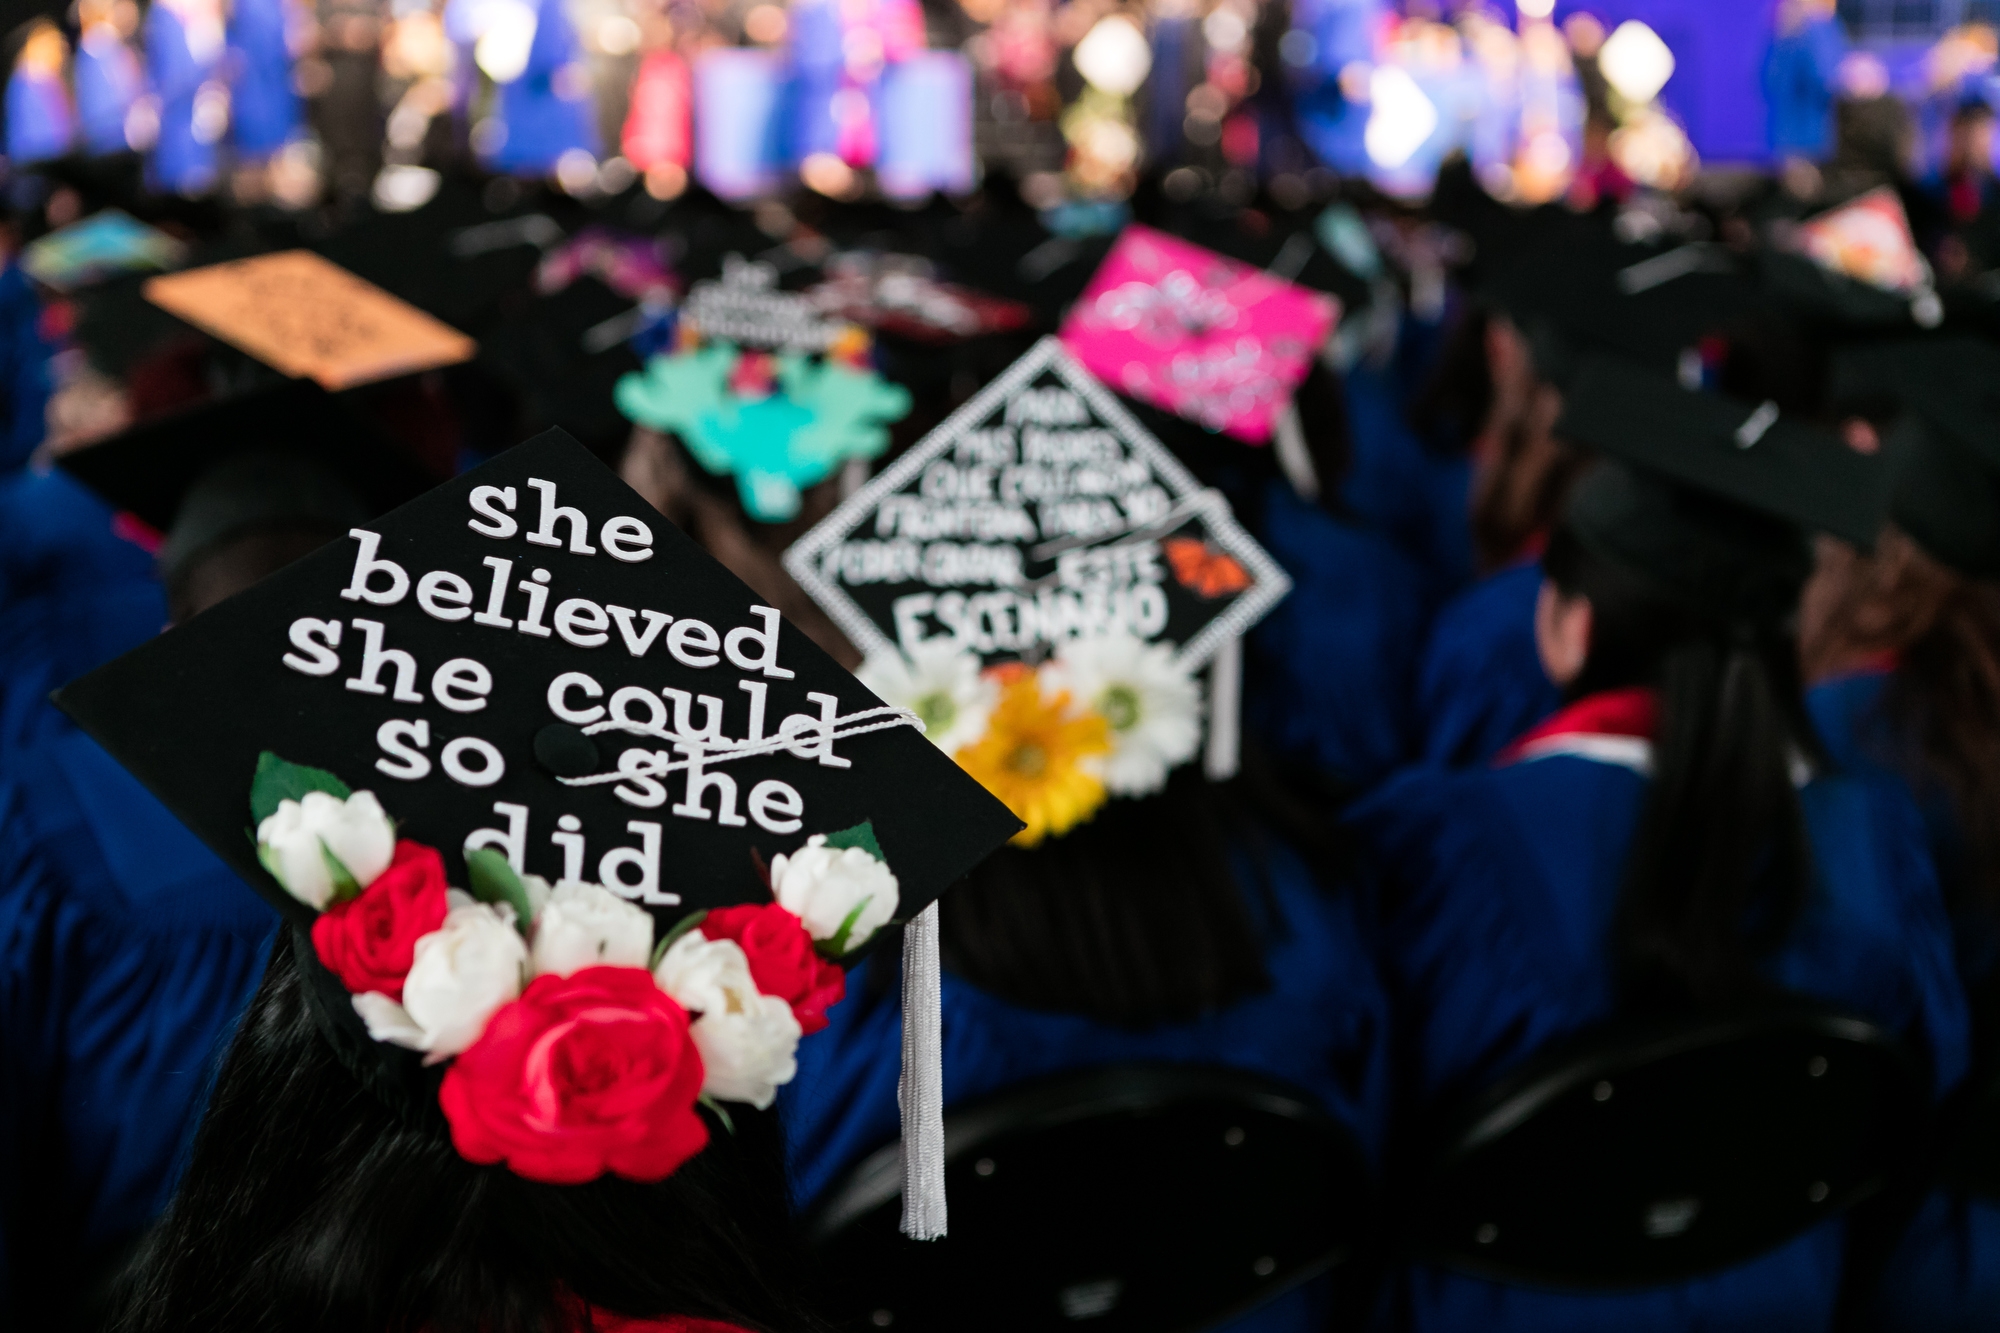 Students show off their decorated mortar boards during the commencement ceremony for the College of Science and Health  and the College of Education at Chicago's Wintrust Arena. (DePaul University/Jeff Carrion)